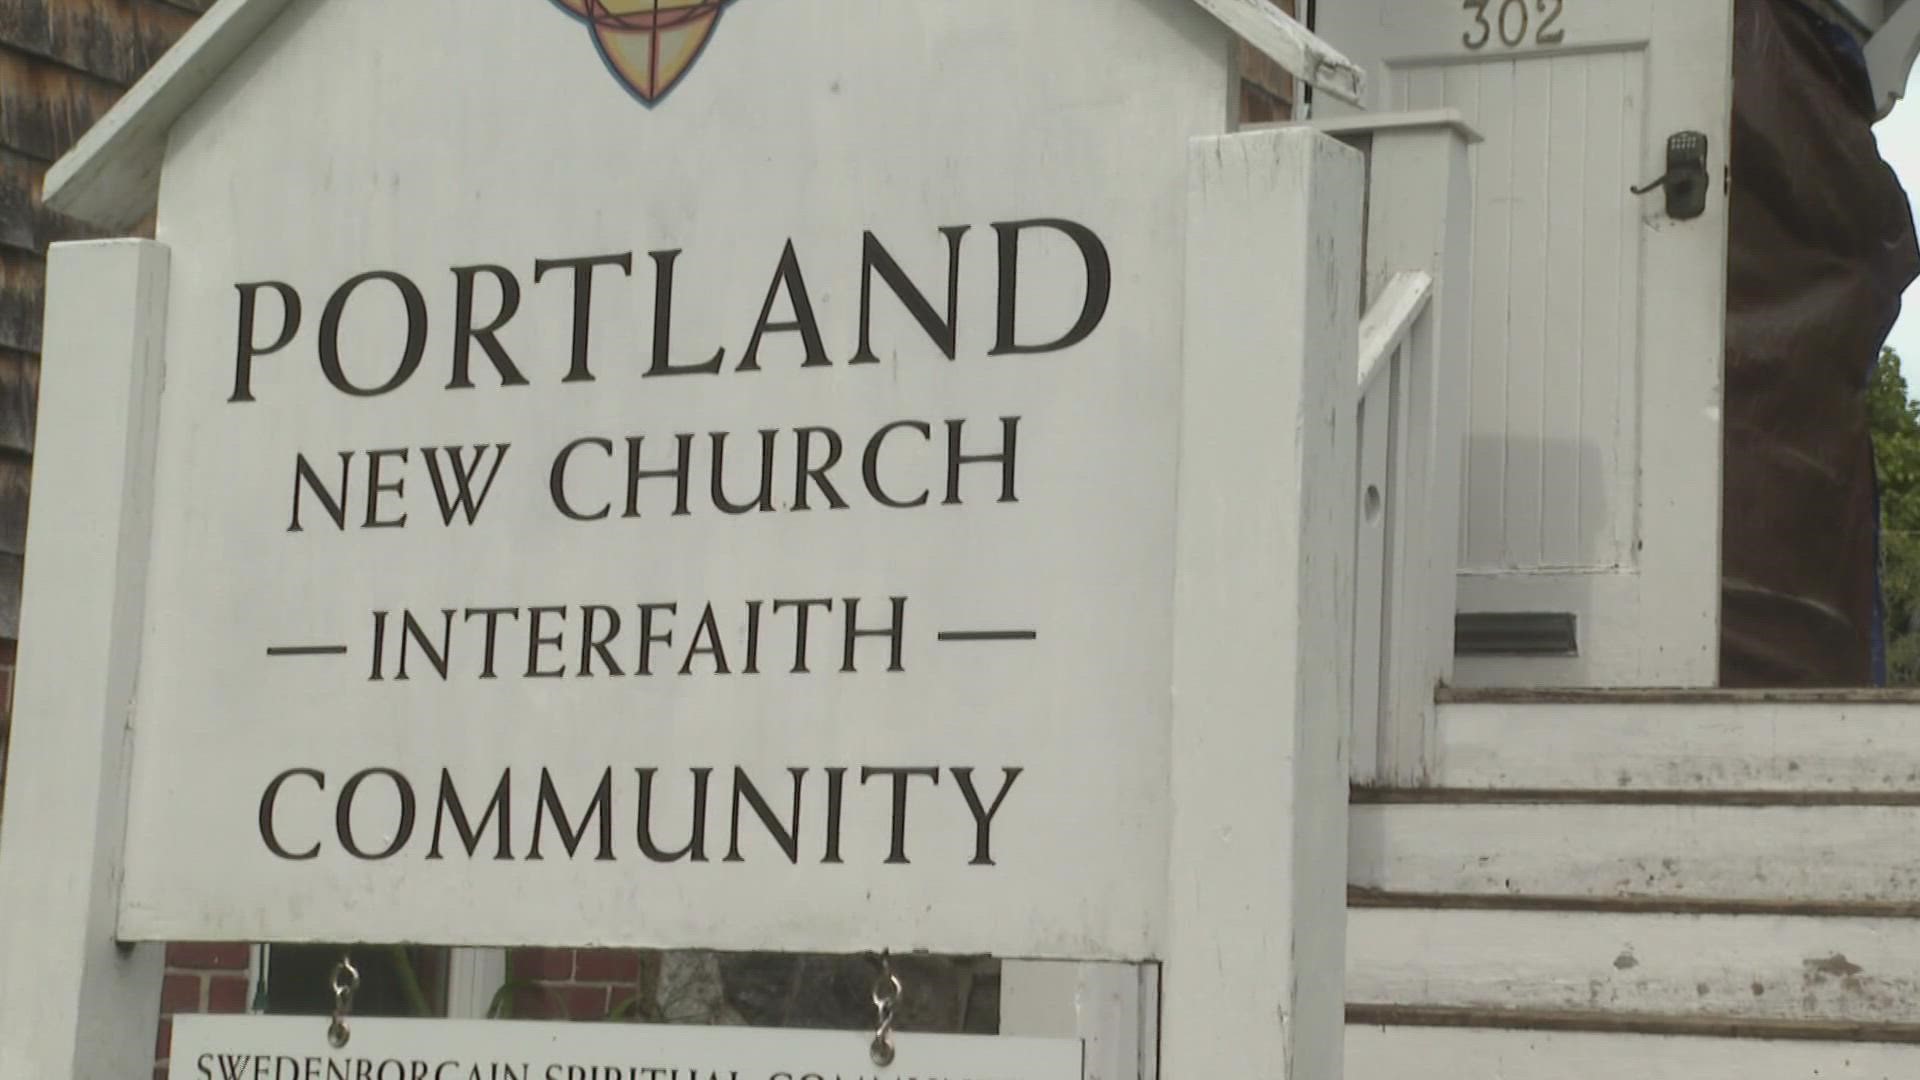 The pastor of Portland New Church believes that the church was targeted for it's public display of inclusion.